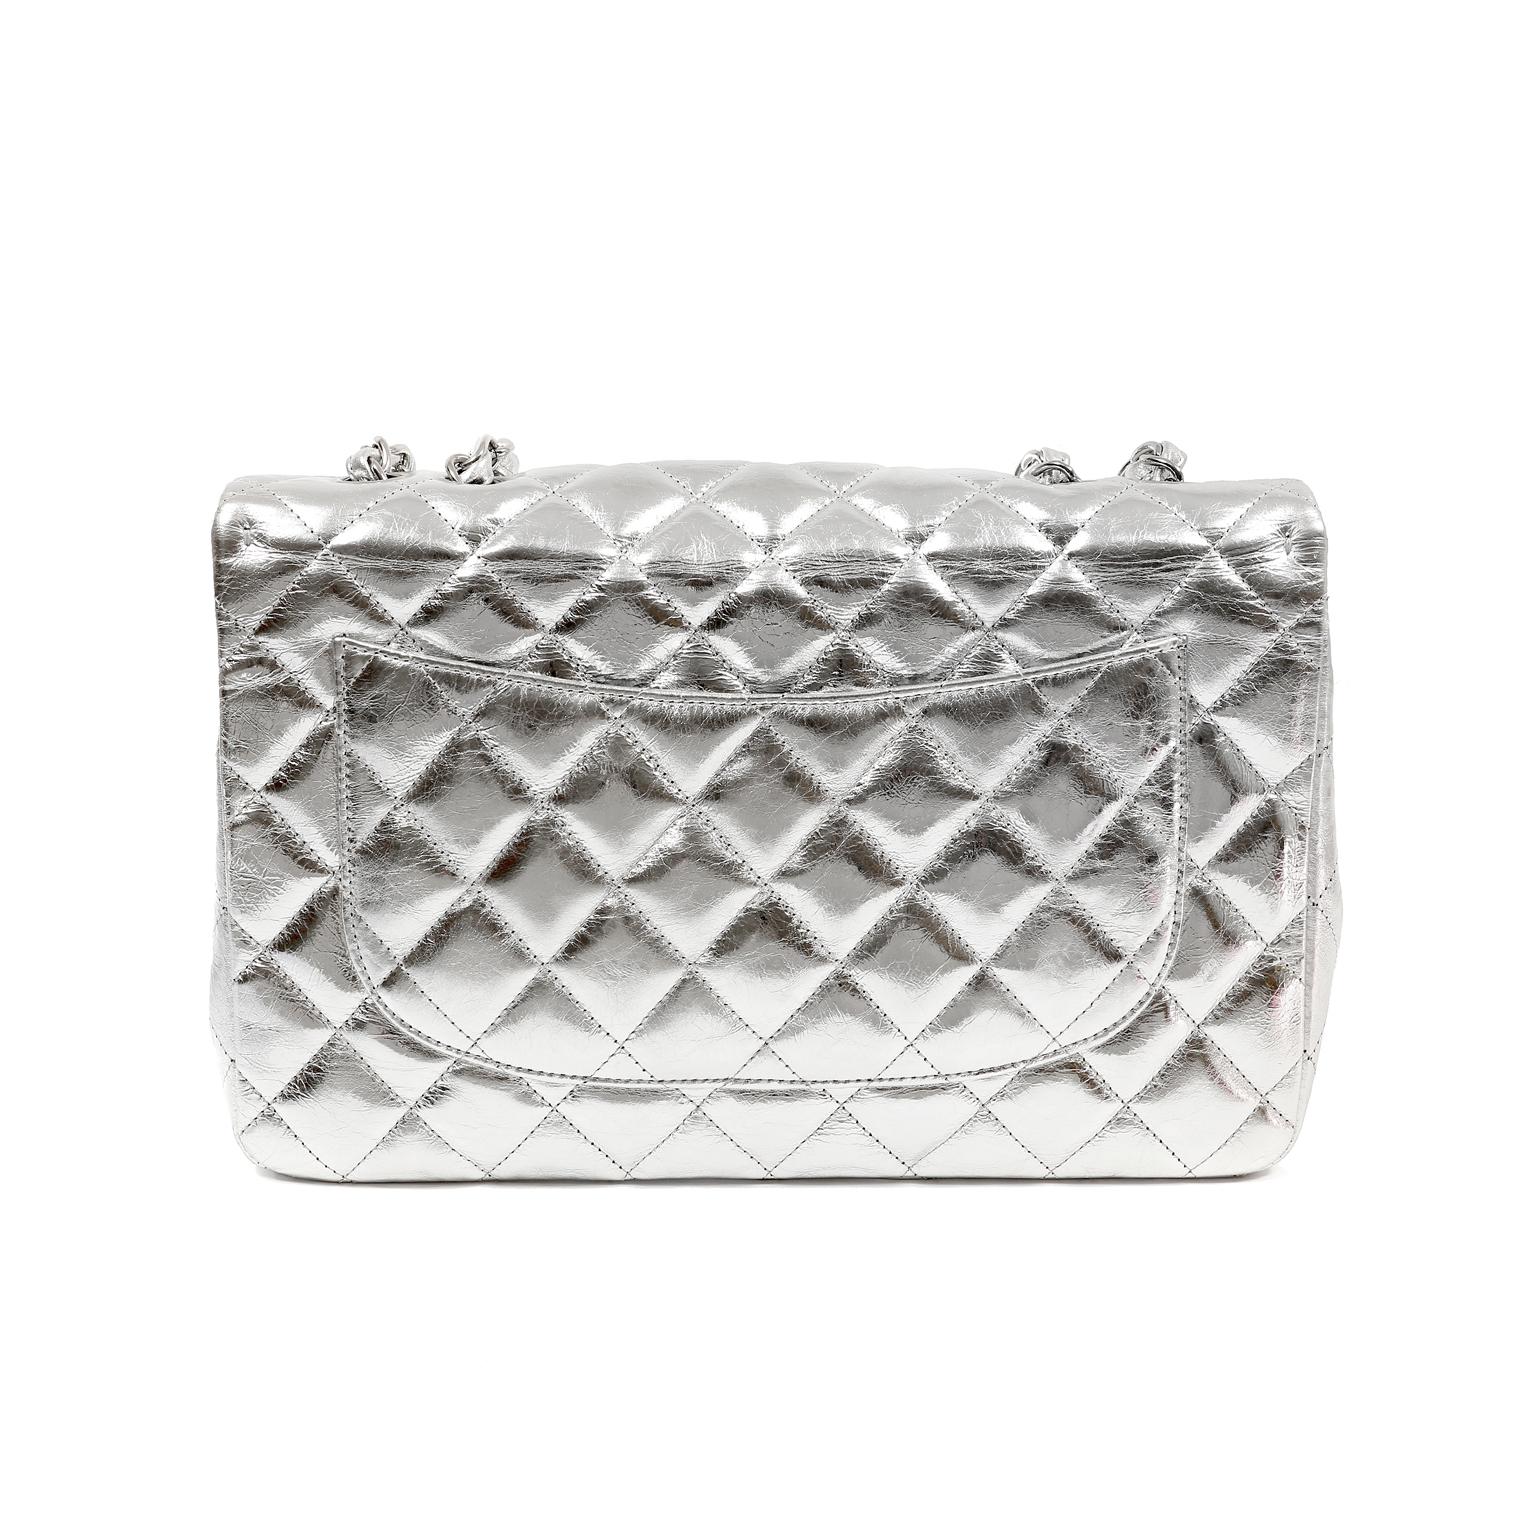 This authentic Chanel Silver Leather Jumbo Classic Flap is in excellent condition.  A truly timeless piece, the Jumbo Classic is certain to hold its value.
Metallic silver foil leather quilted in signature Chanel diamond pattern.  Silver tone